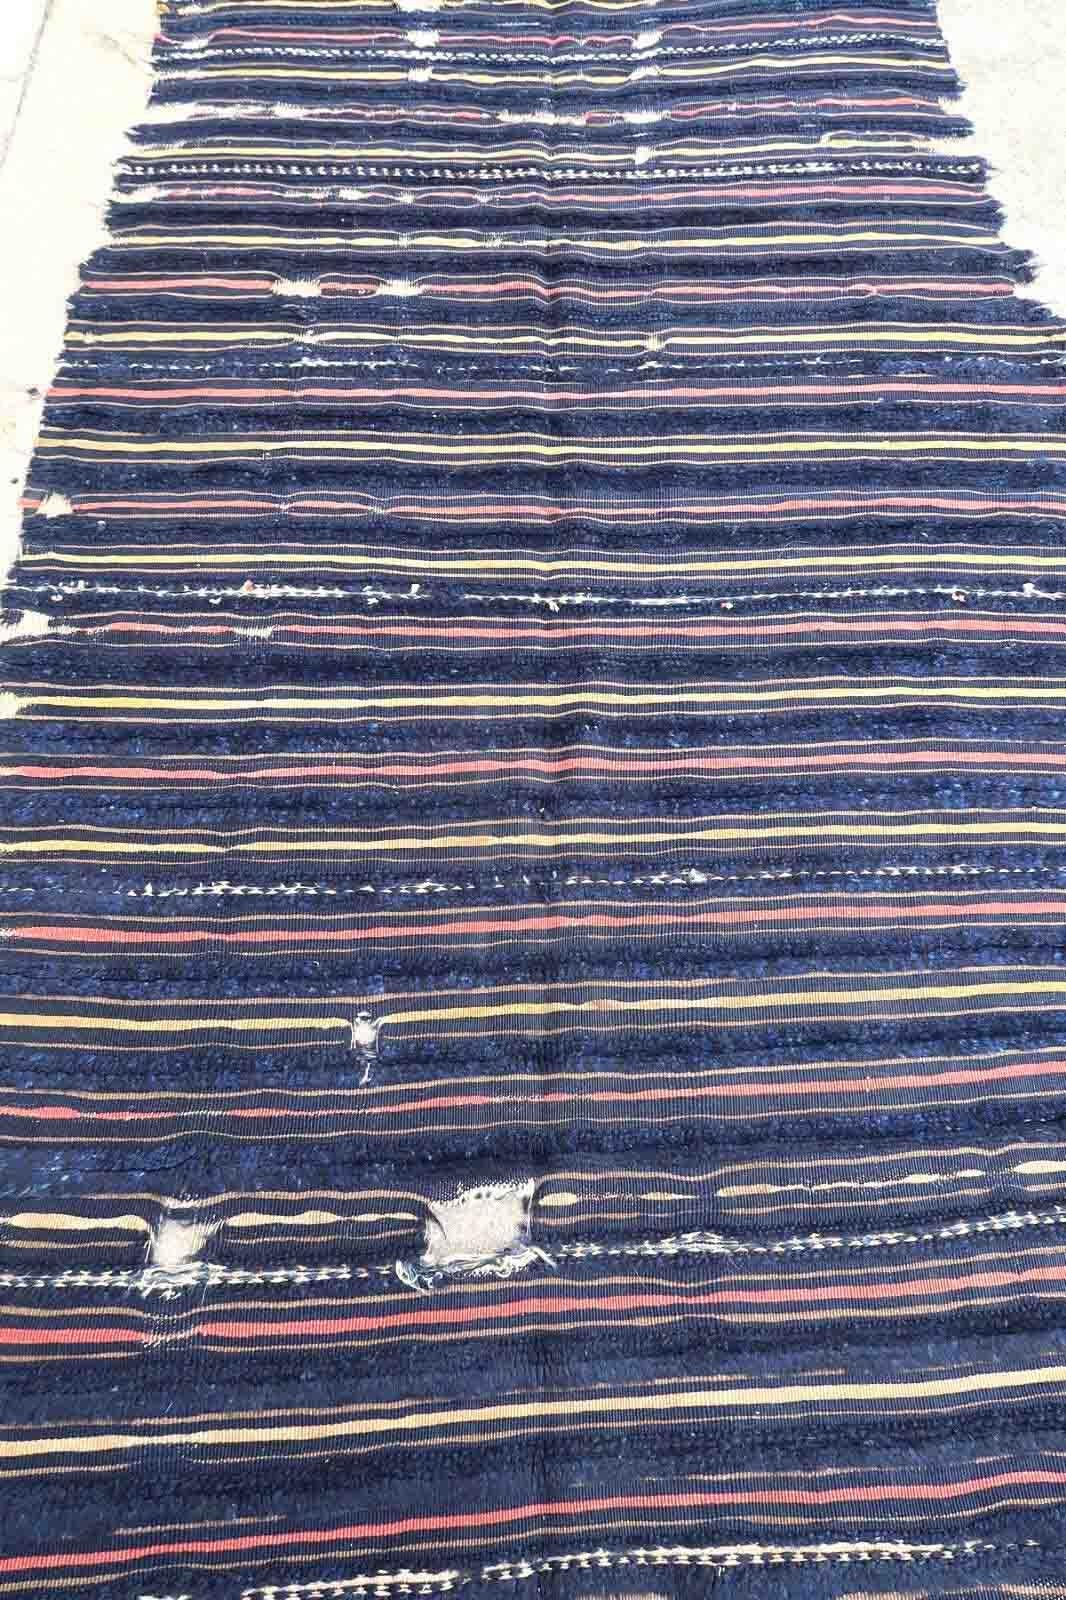 Handmade antique Berber handira from Morocco, Outat El Haj region.
This piece is from the end of 19th century in original condition, it has some holes and wears. The kilim is collectible and made in wool.

-condition: original, some age wear,